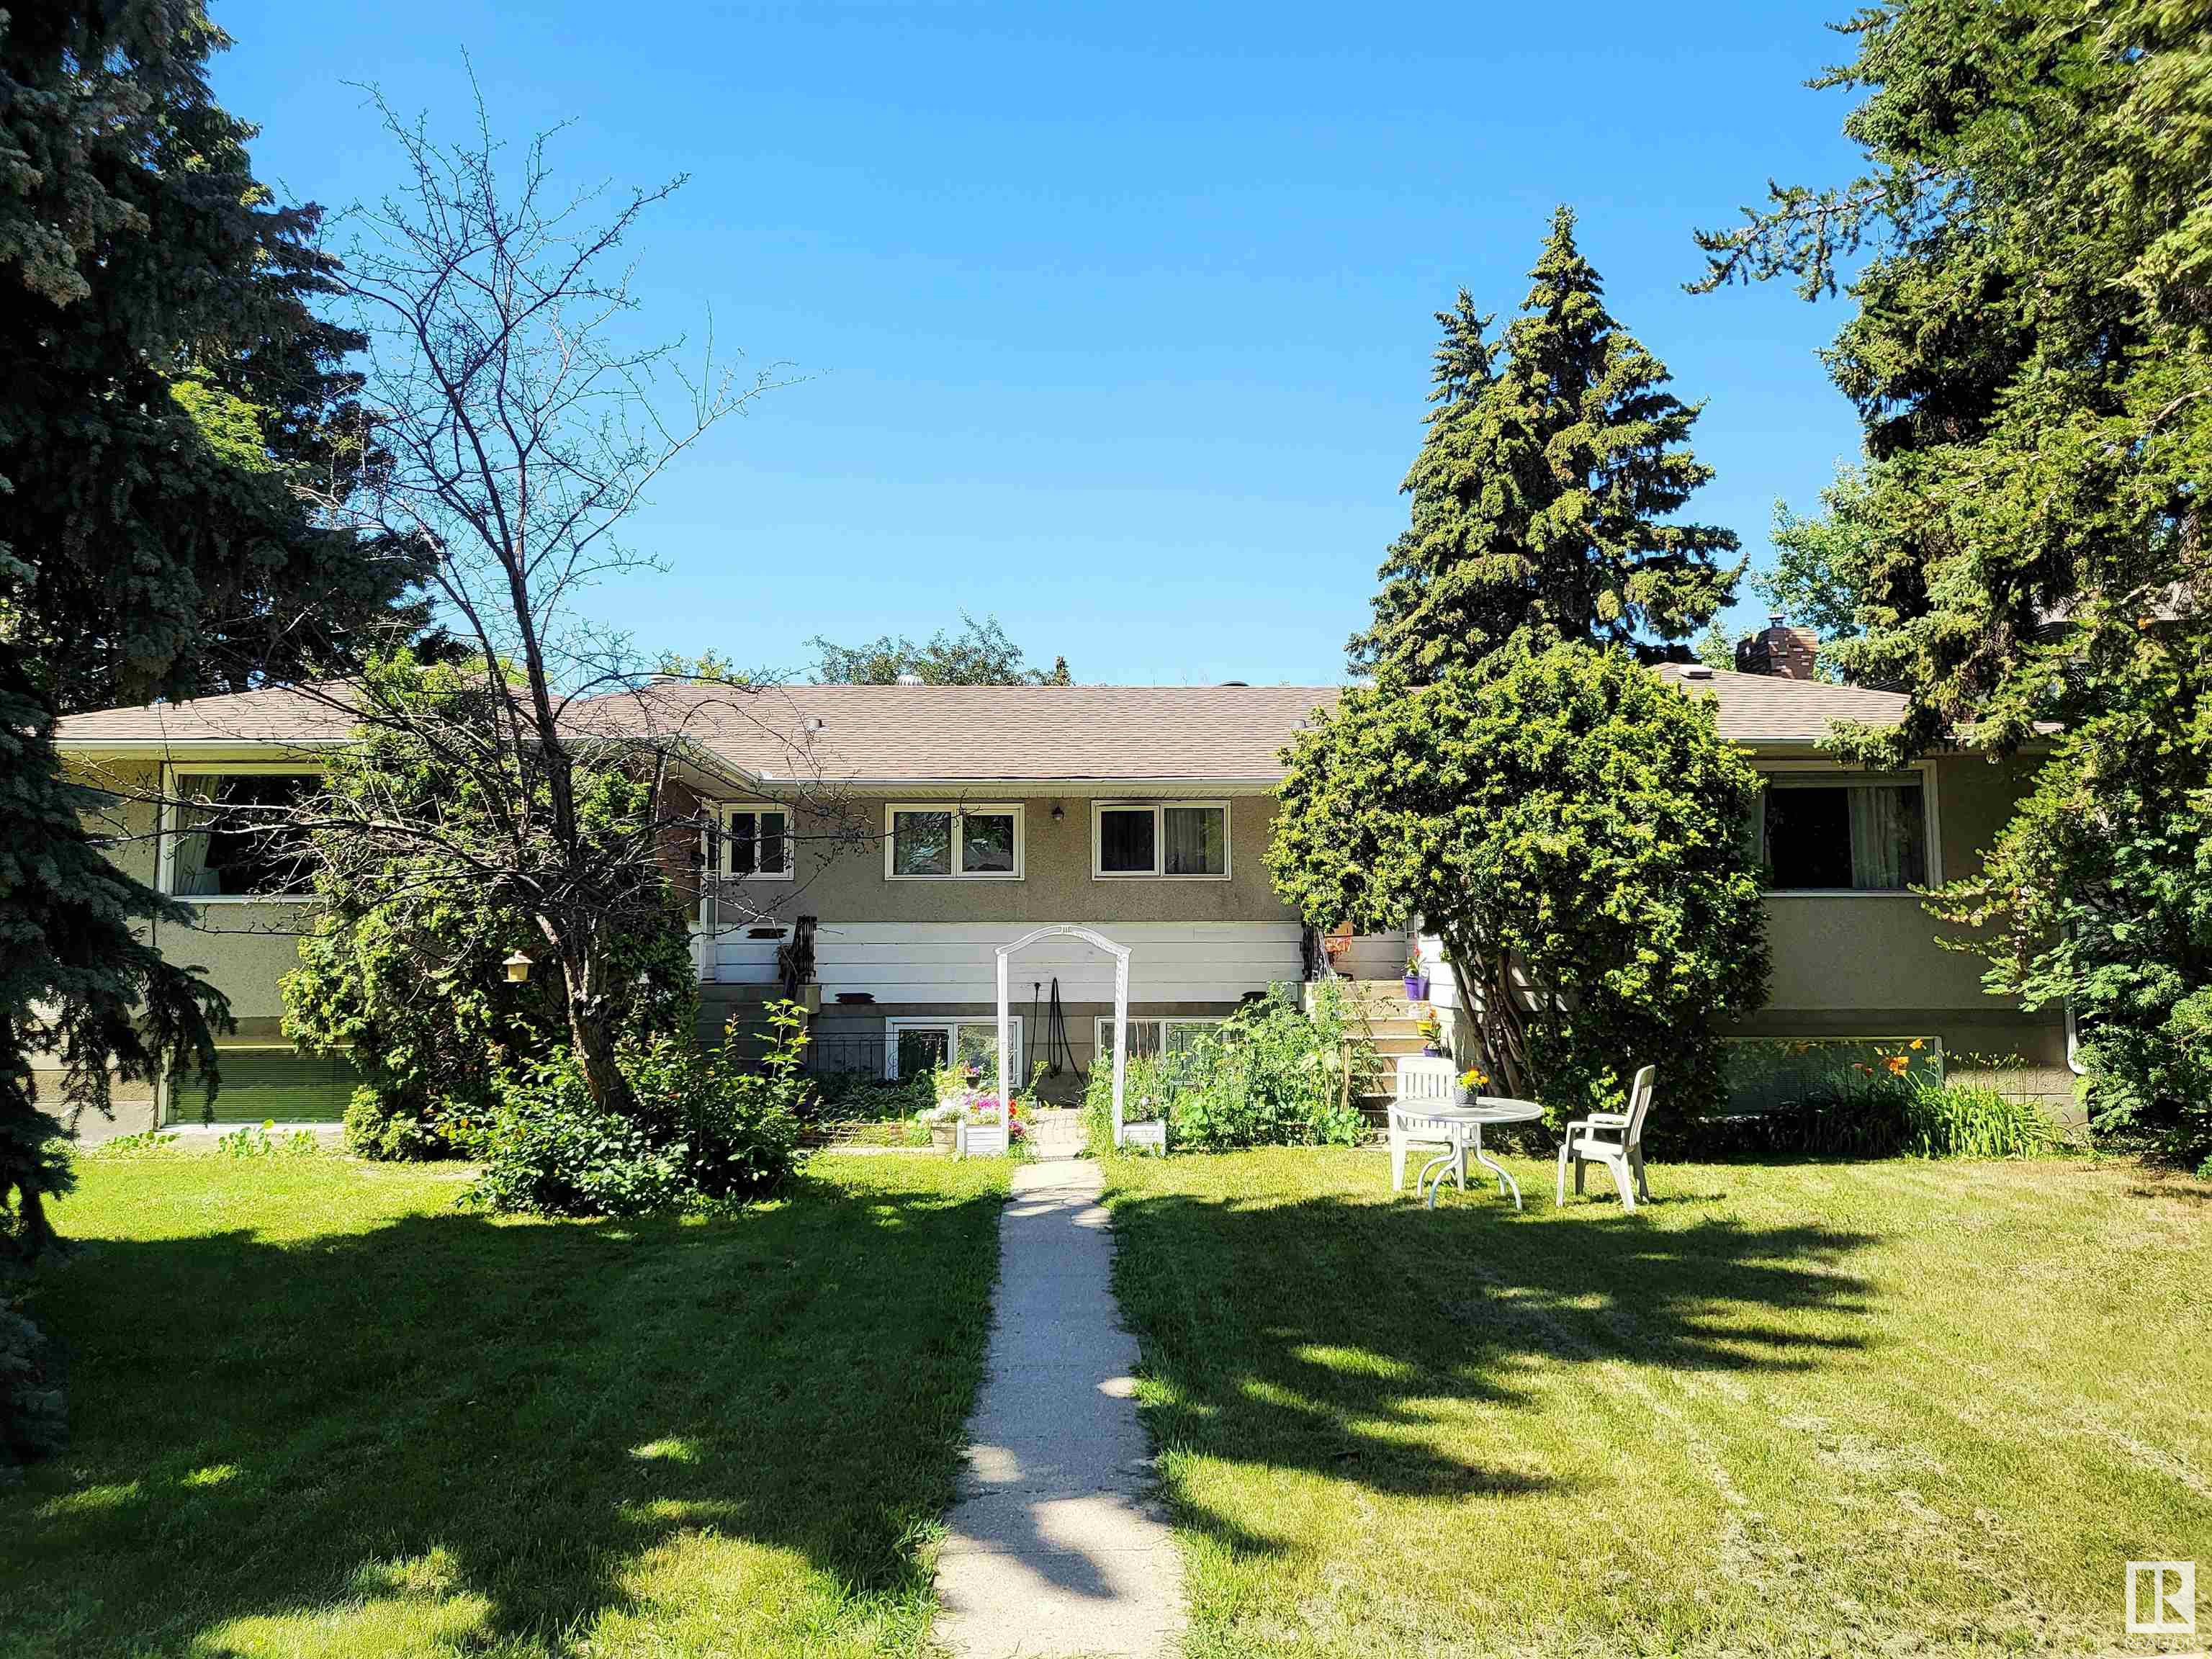      10202 76 ST NW , Edmonton,  ,T6A 3A6 ;  Listing Number: MLS E4341003